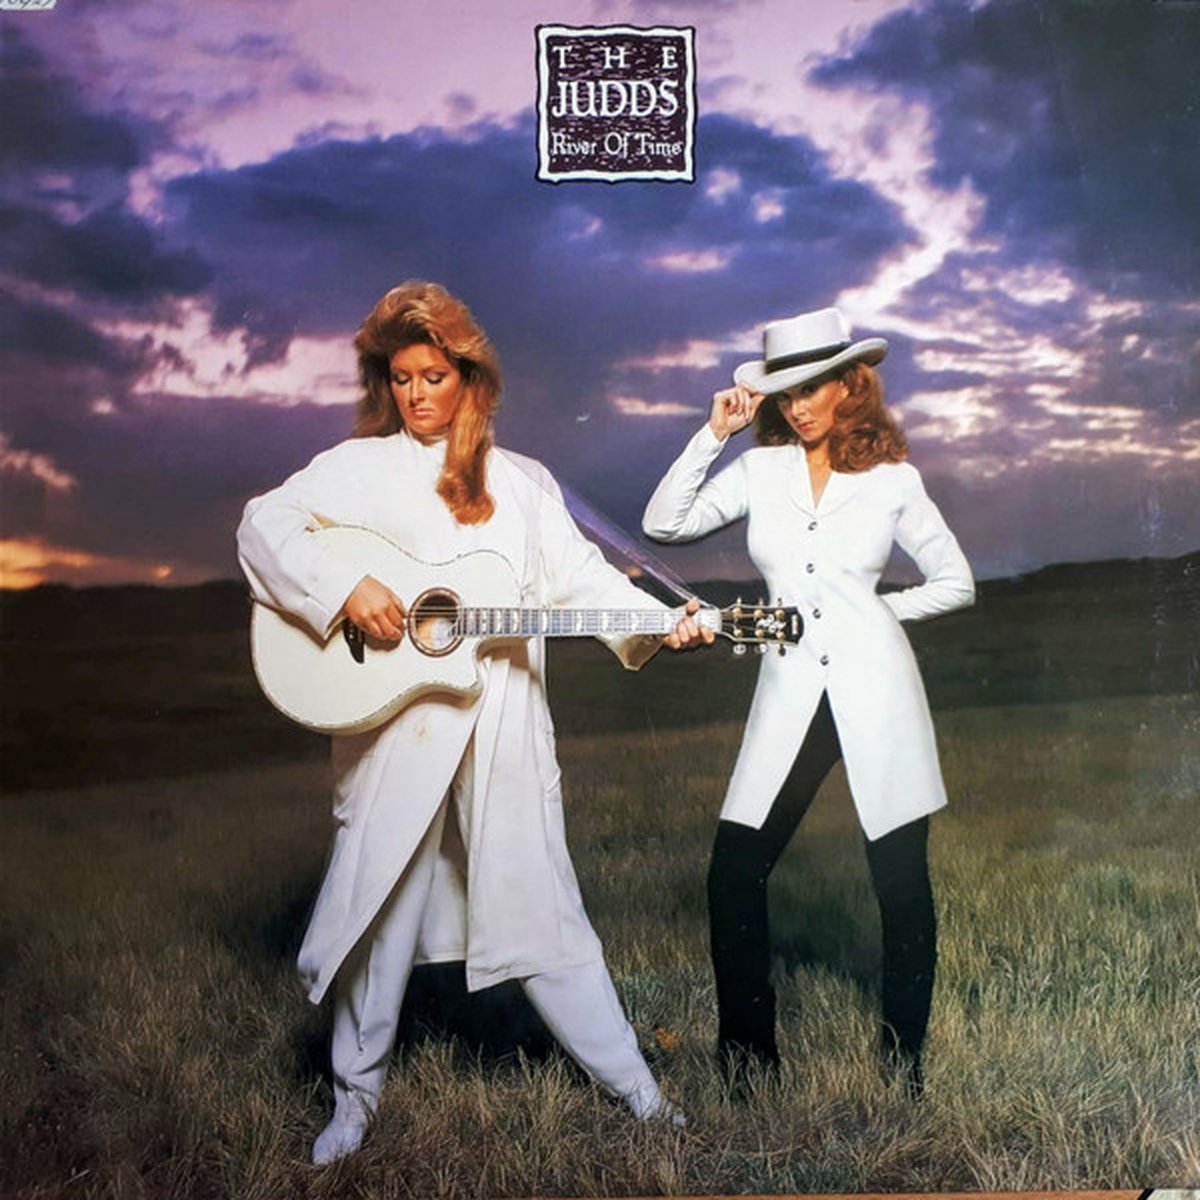 THE JUDDS - River of Time - The Judds